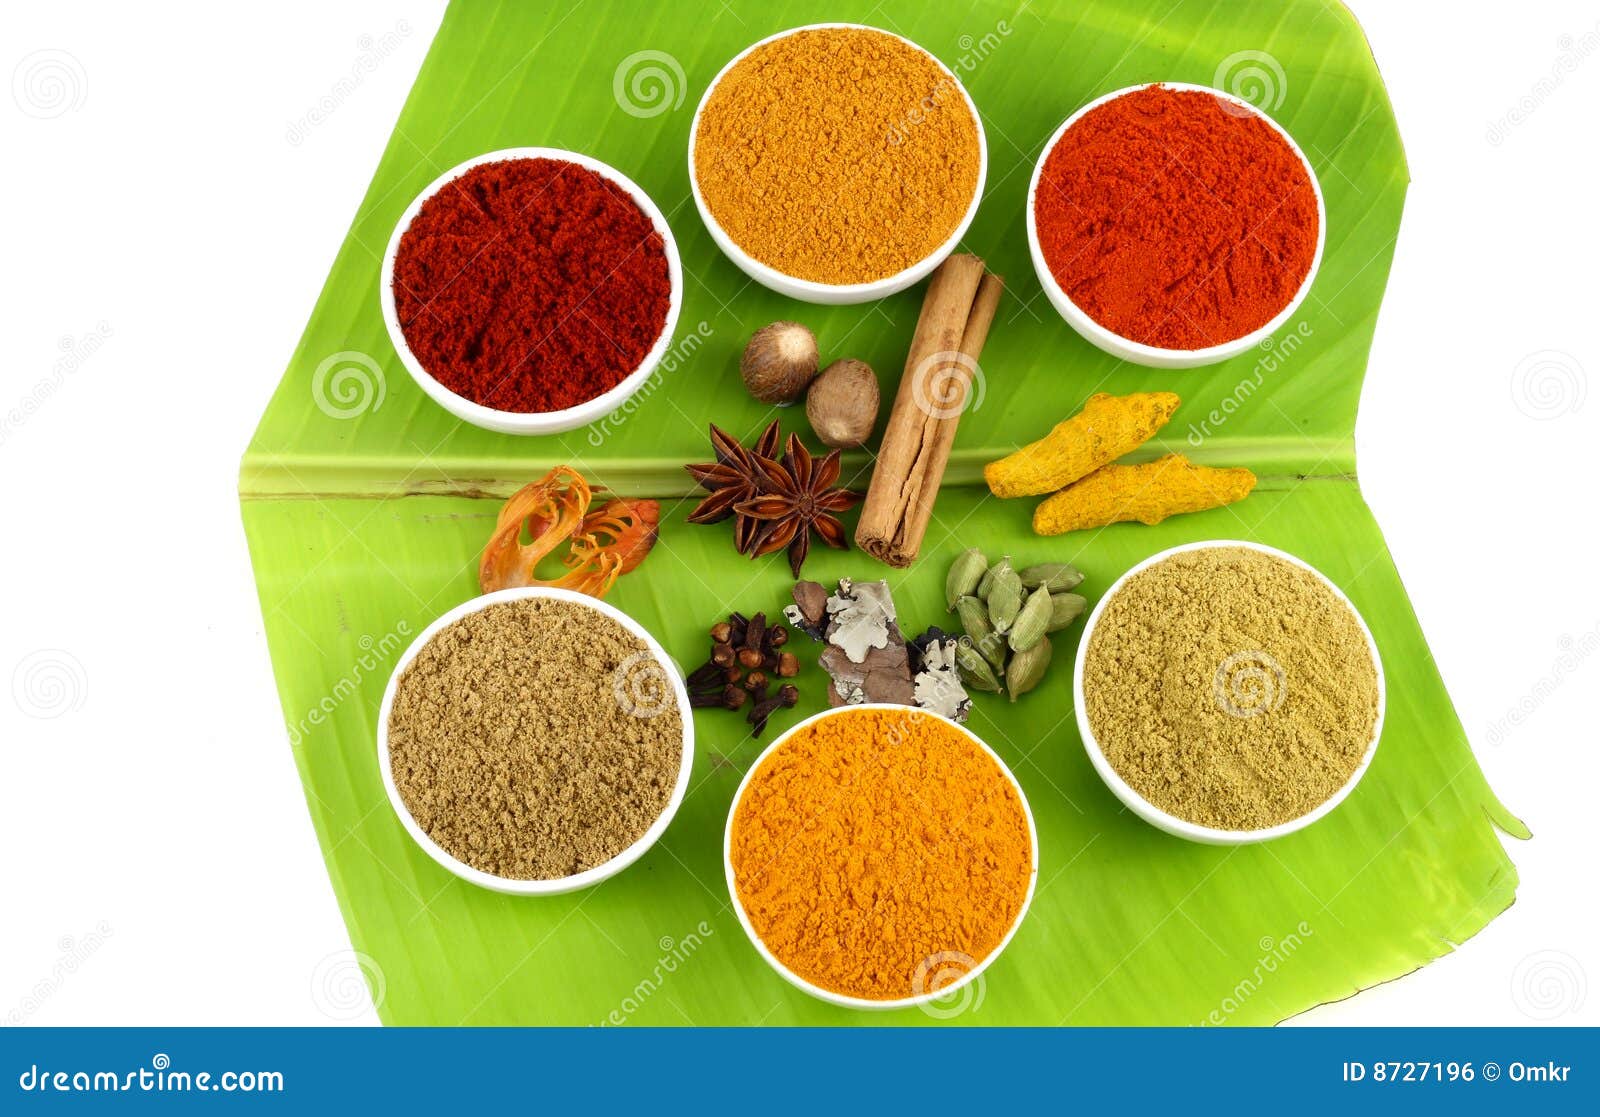 variety of spices on banana leaves